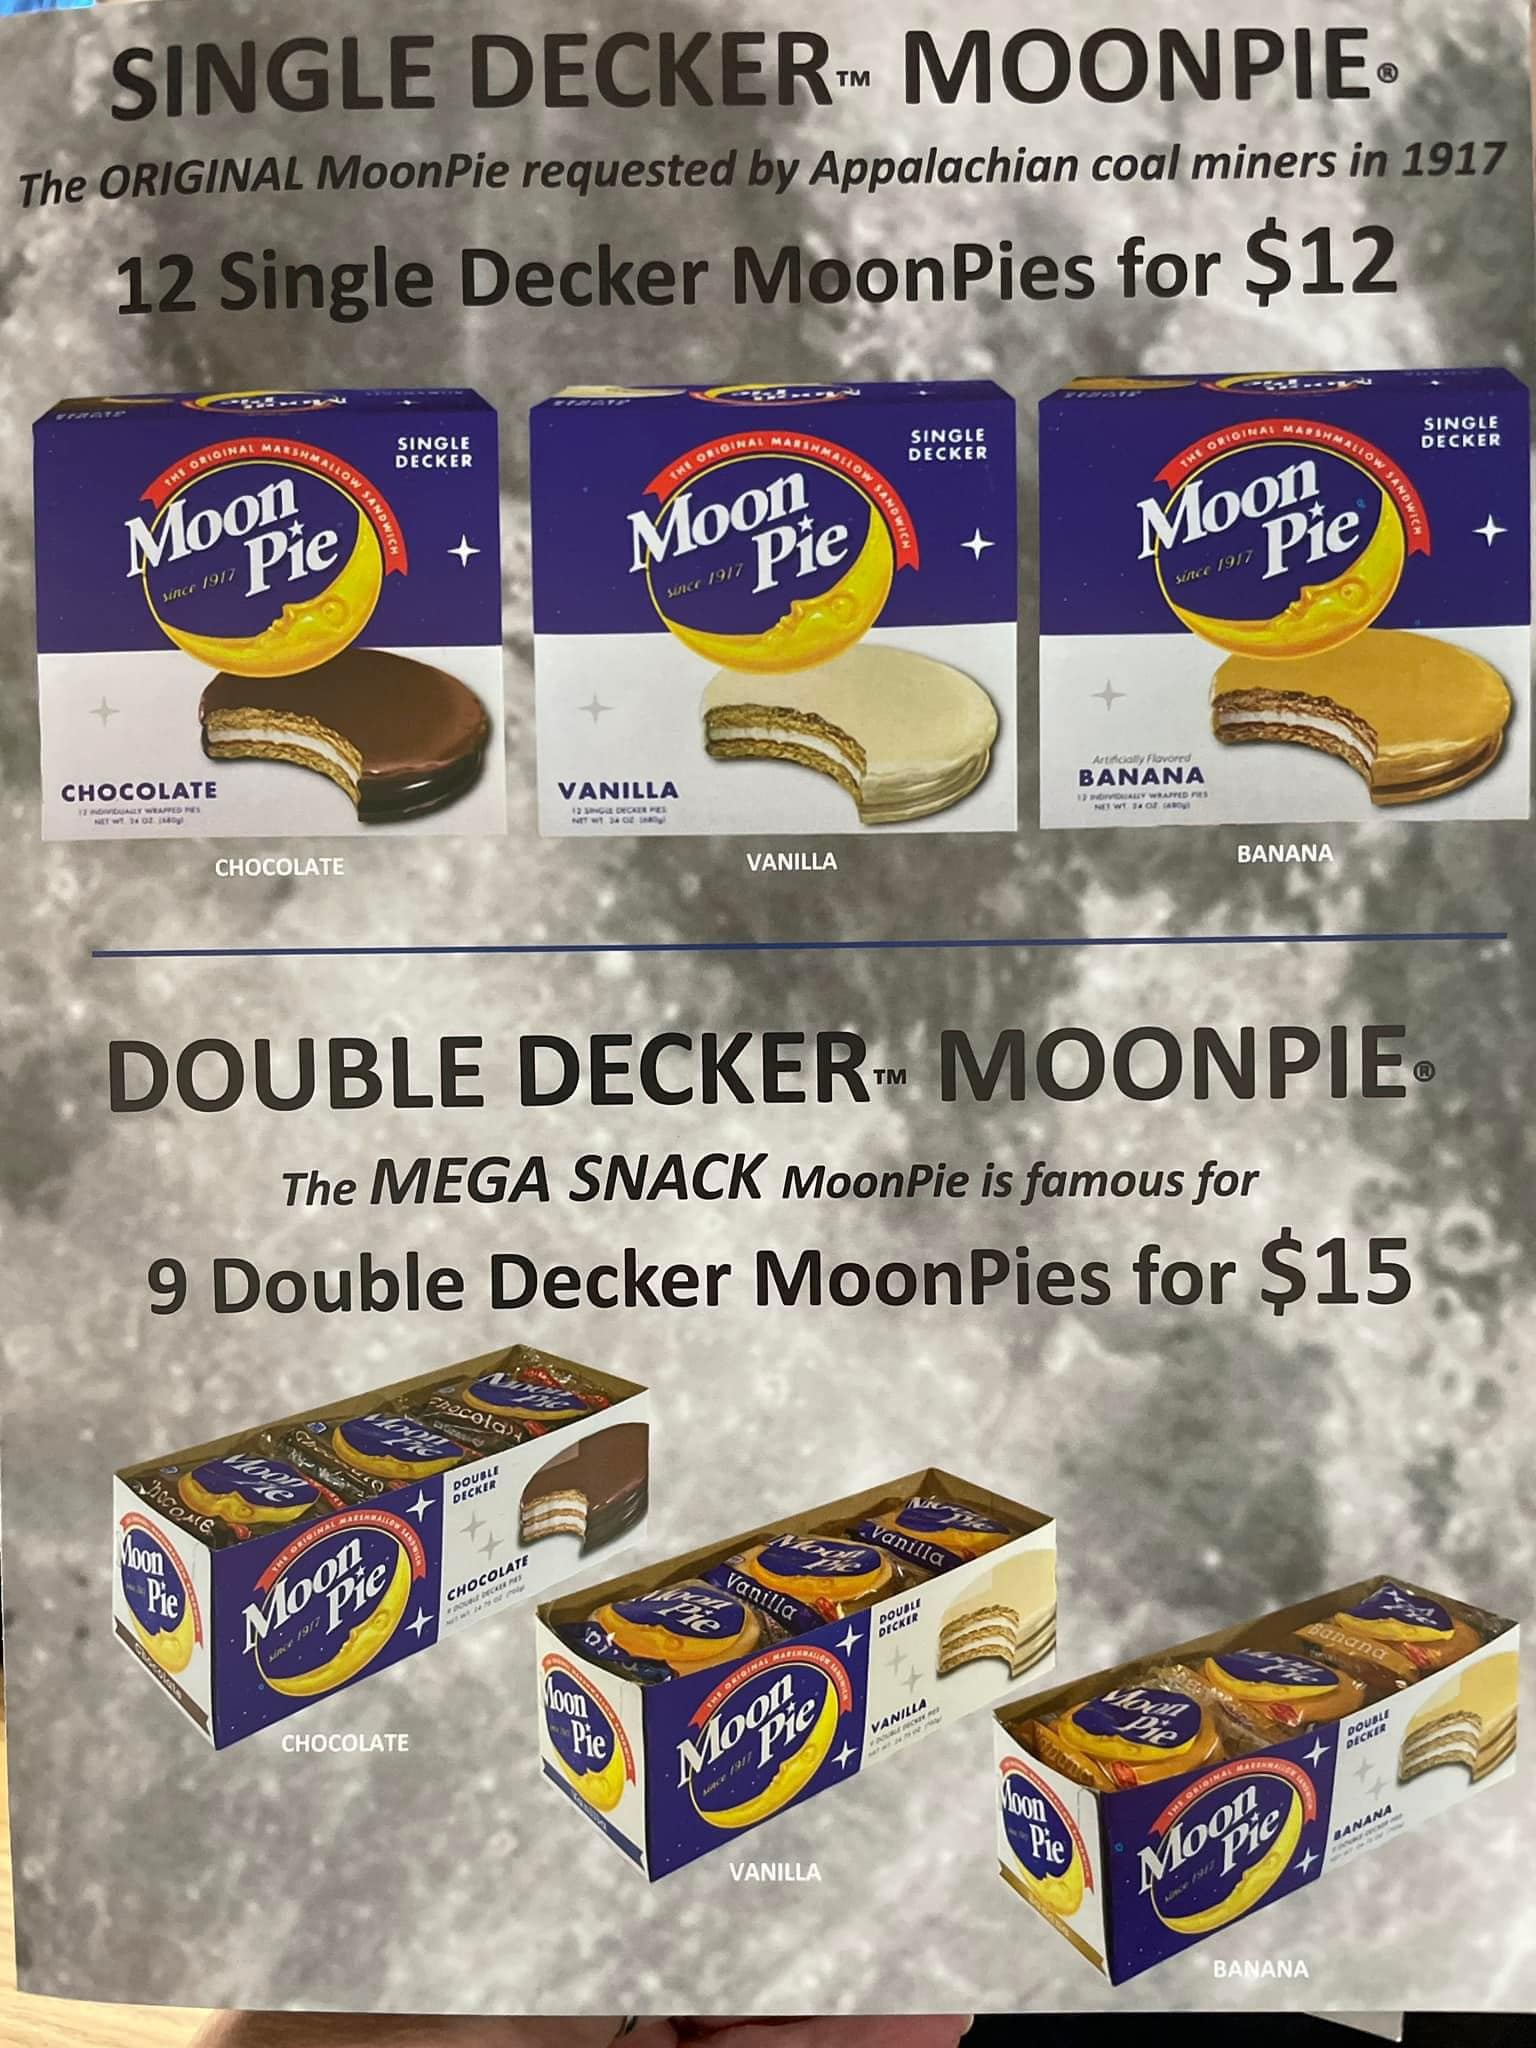 MoonPie Standard size for $12 a box. Double Decker for $15 a box